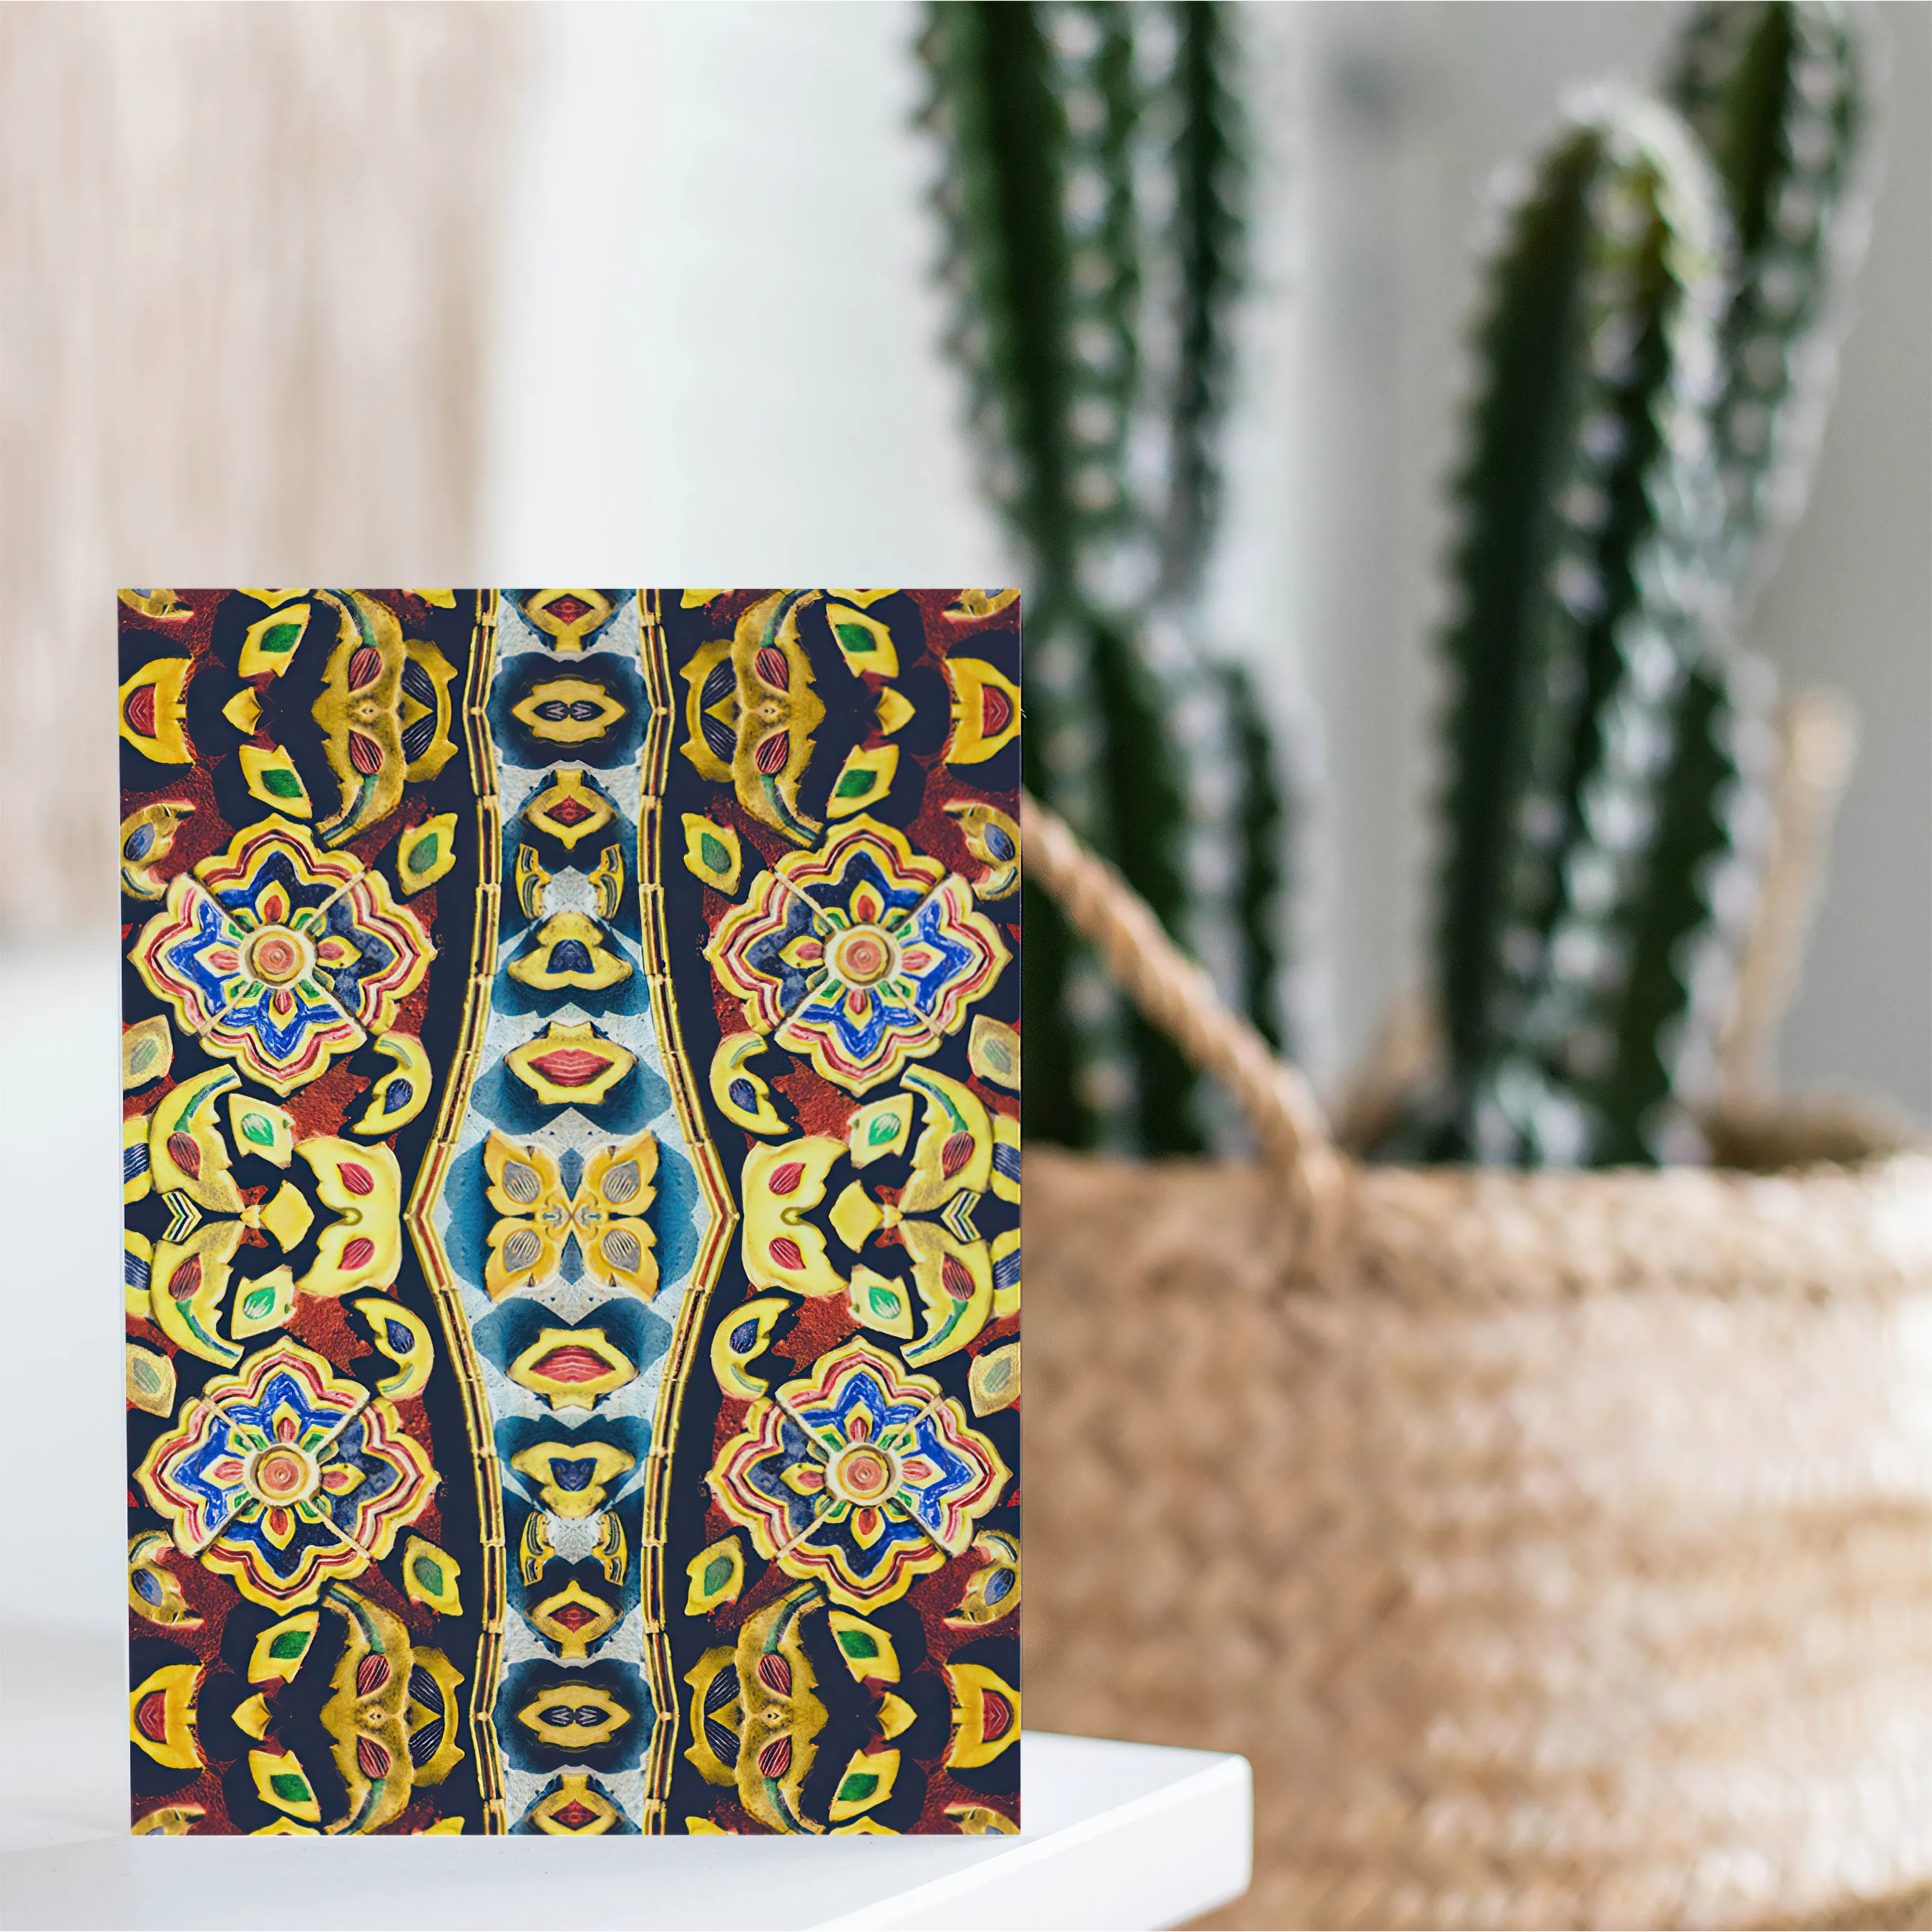 Masala Thai Greeting Card - Greeting & Note Cards - Aesthetic Art